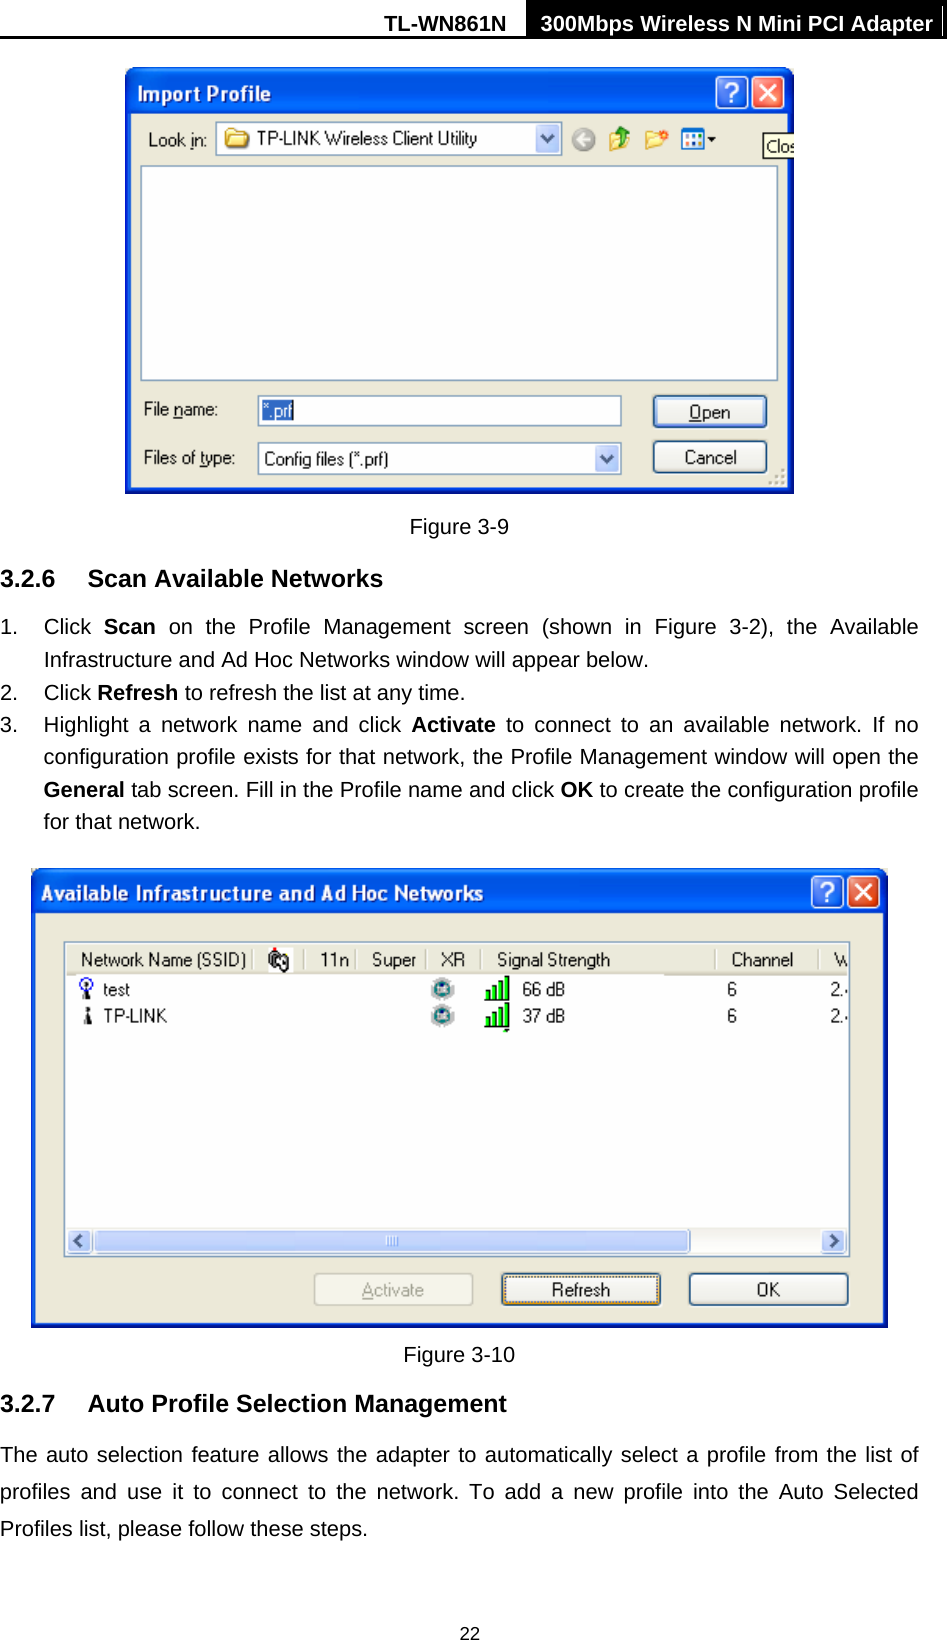 TL-WN861N  300Mbps Wireless N Mini PCI Adapter  22 Figure 3-9 3.2.6  Scan Available Networks 1. Click Scan on the Profile Management screen (shown in Figure 3-2), the Available Infrastructure and Ad Hoc Networks window will appear below. 2. Click Refresh to refresh the list at any time. 3.  Highlight a network name and click Activate to connect to an available network. If no configuration profile exists for that network, the Profile Management window will open the General tab screen. Fill in the Profile name and click OK to create the configuration profile for that network.  Figure 3-10 3.2.7  Auto Profile Selection Management The auto selection feature allows the adapter to automatically select a profile from the list of profiles and use it to connect to the network. To add a new profile into the Auto Selected Profiles list, please follow these steps. 